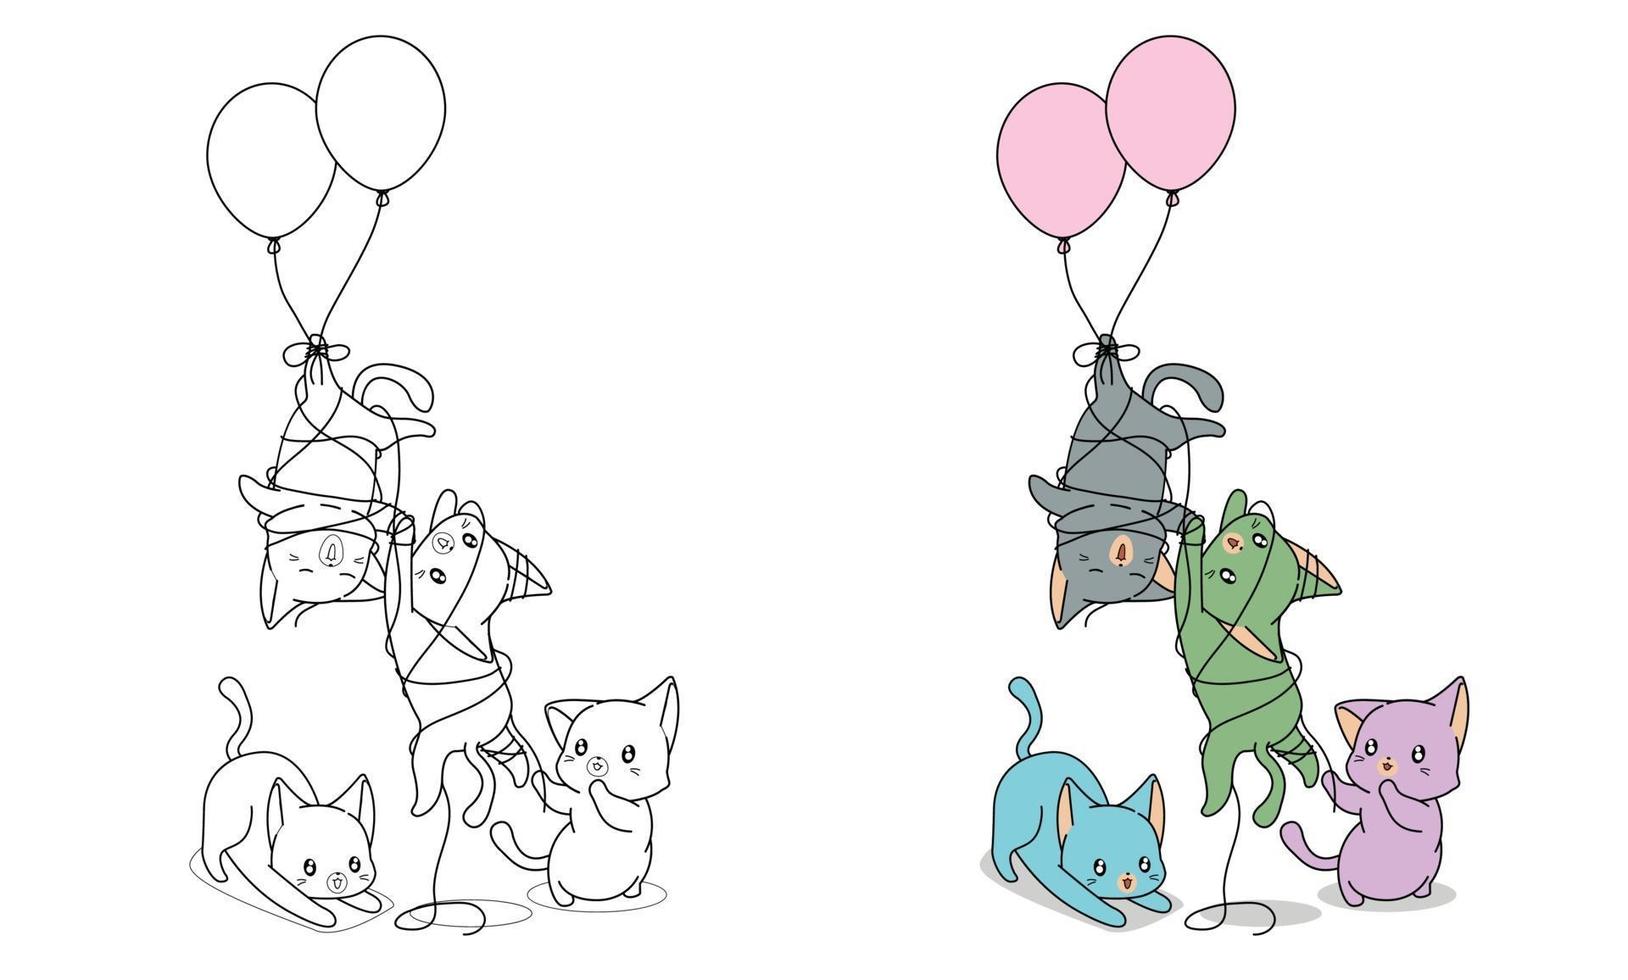 Naughty cats with balloons coloring page for kids vector